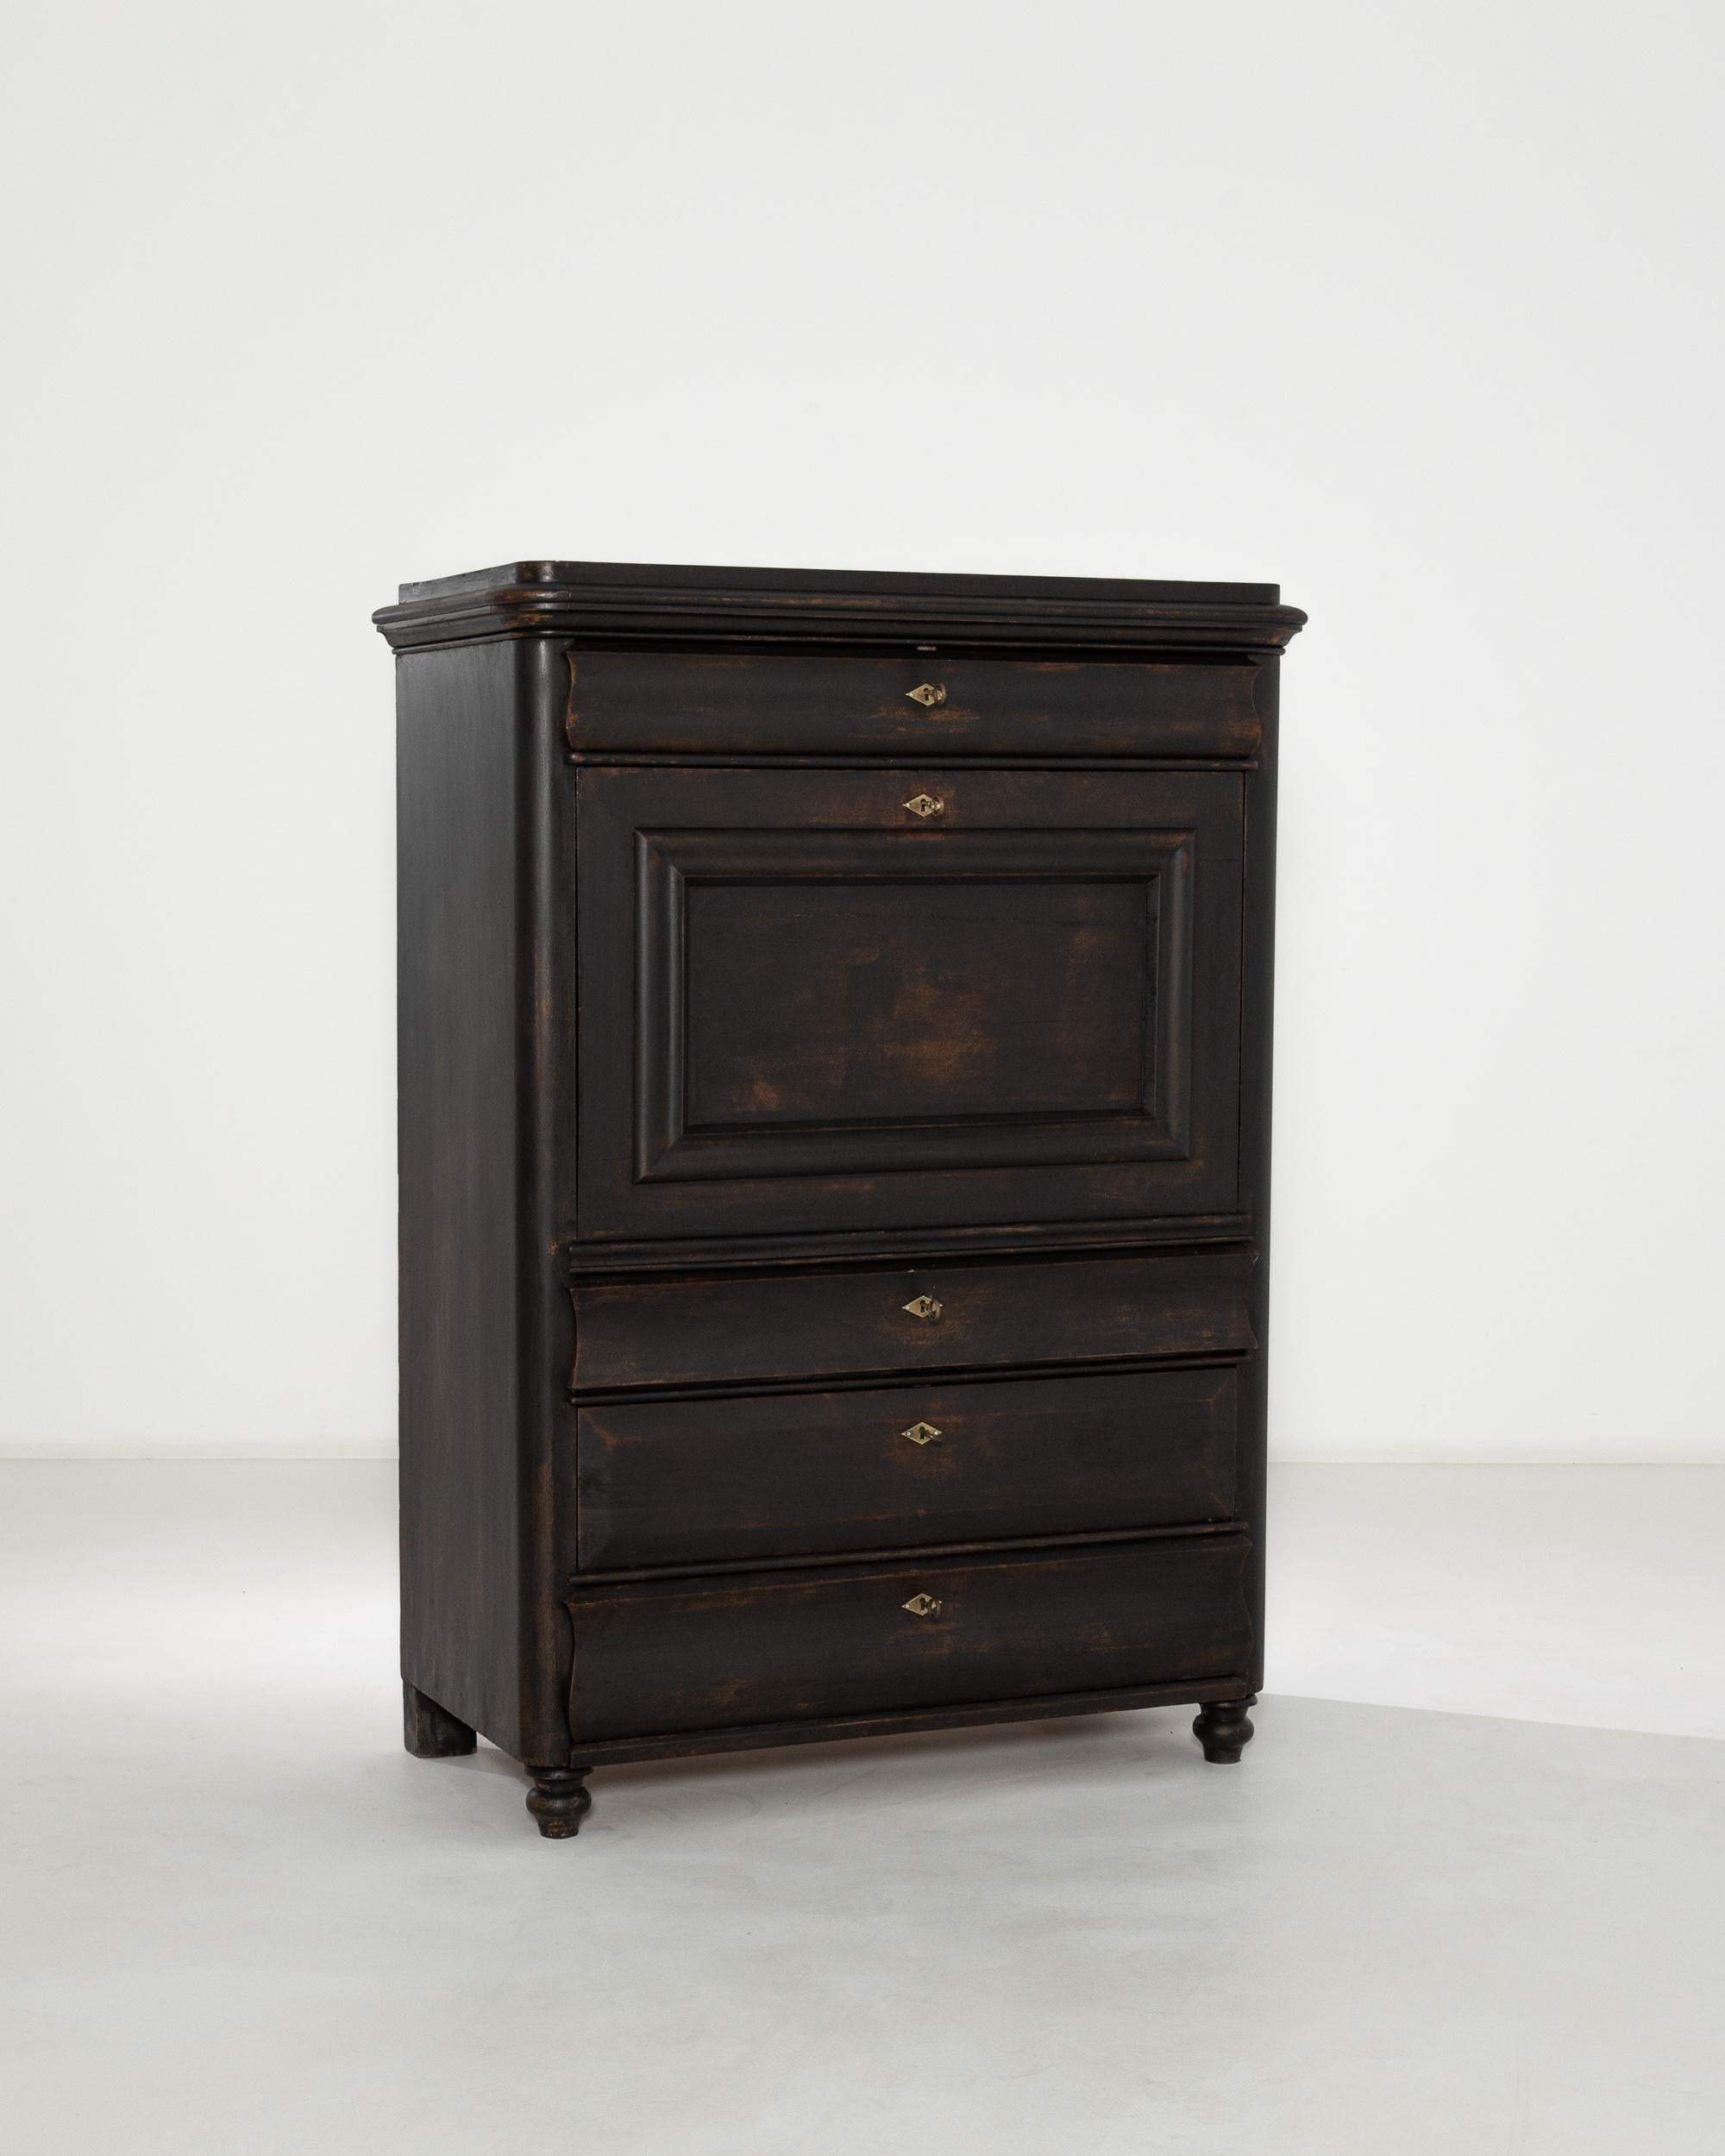 Discover a touch of vintage elegance with this 1800s French Wooden Bar, a relic of bygone opulence with its deep, distressed black patina and elegant craftsmanship. Each drawer and panel is accentuated by classic turn-of-the-century French carvings